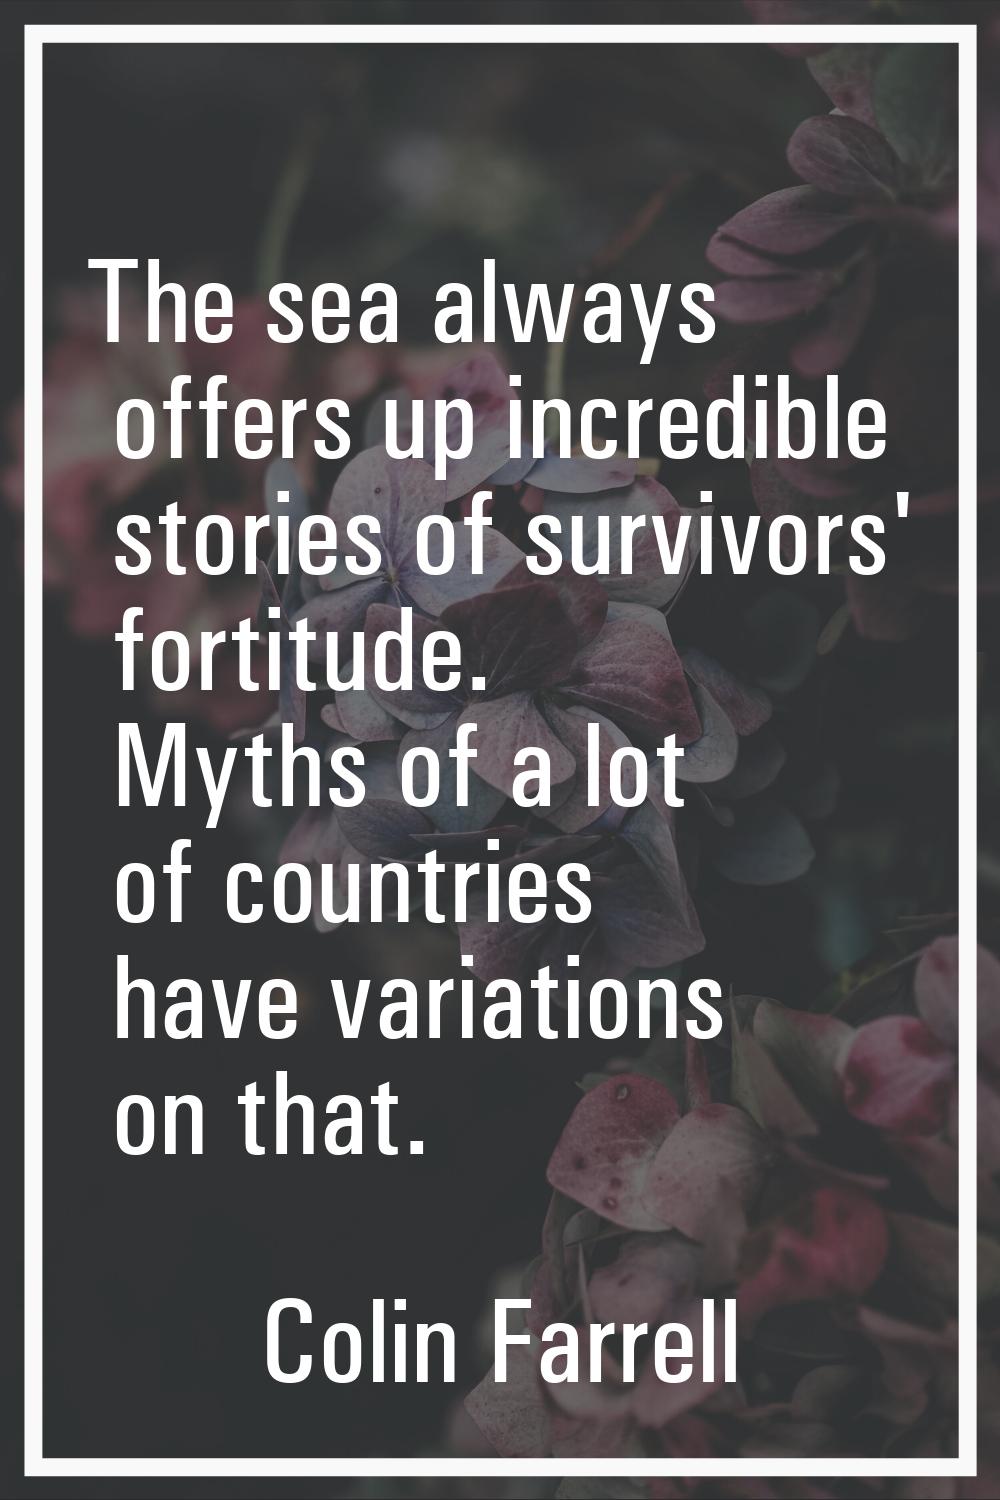 The sea always offers up incredible stories of survivors' fortitude. Myths of a lot of countries ha